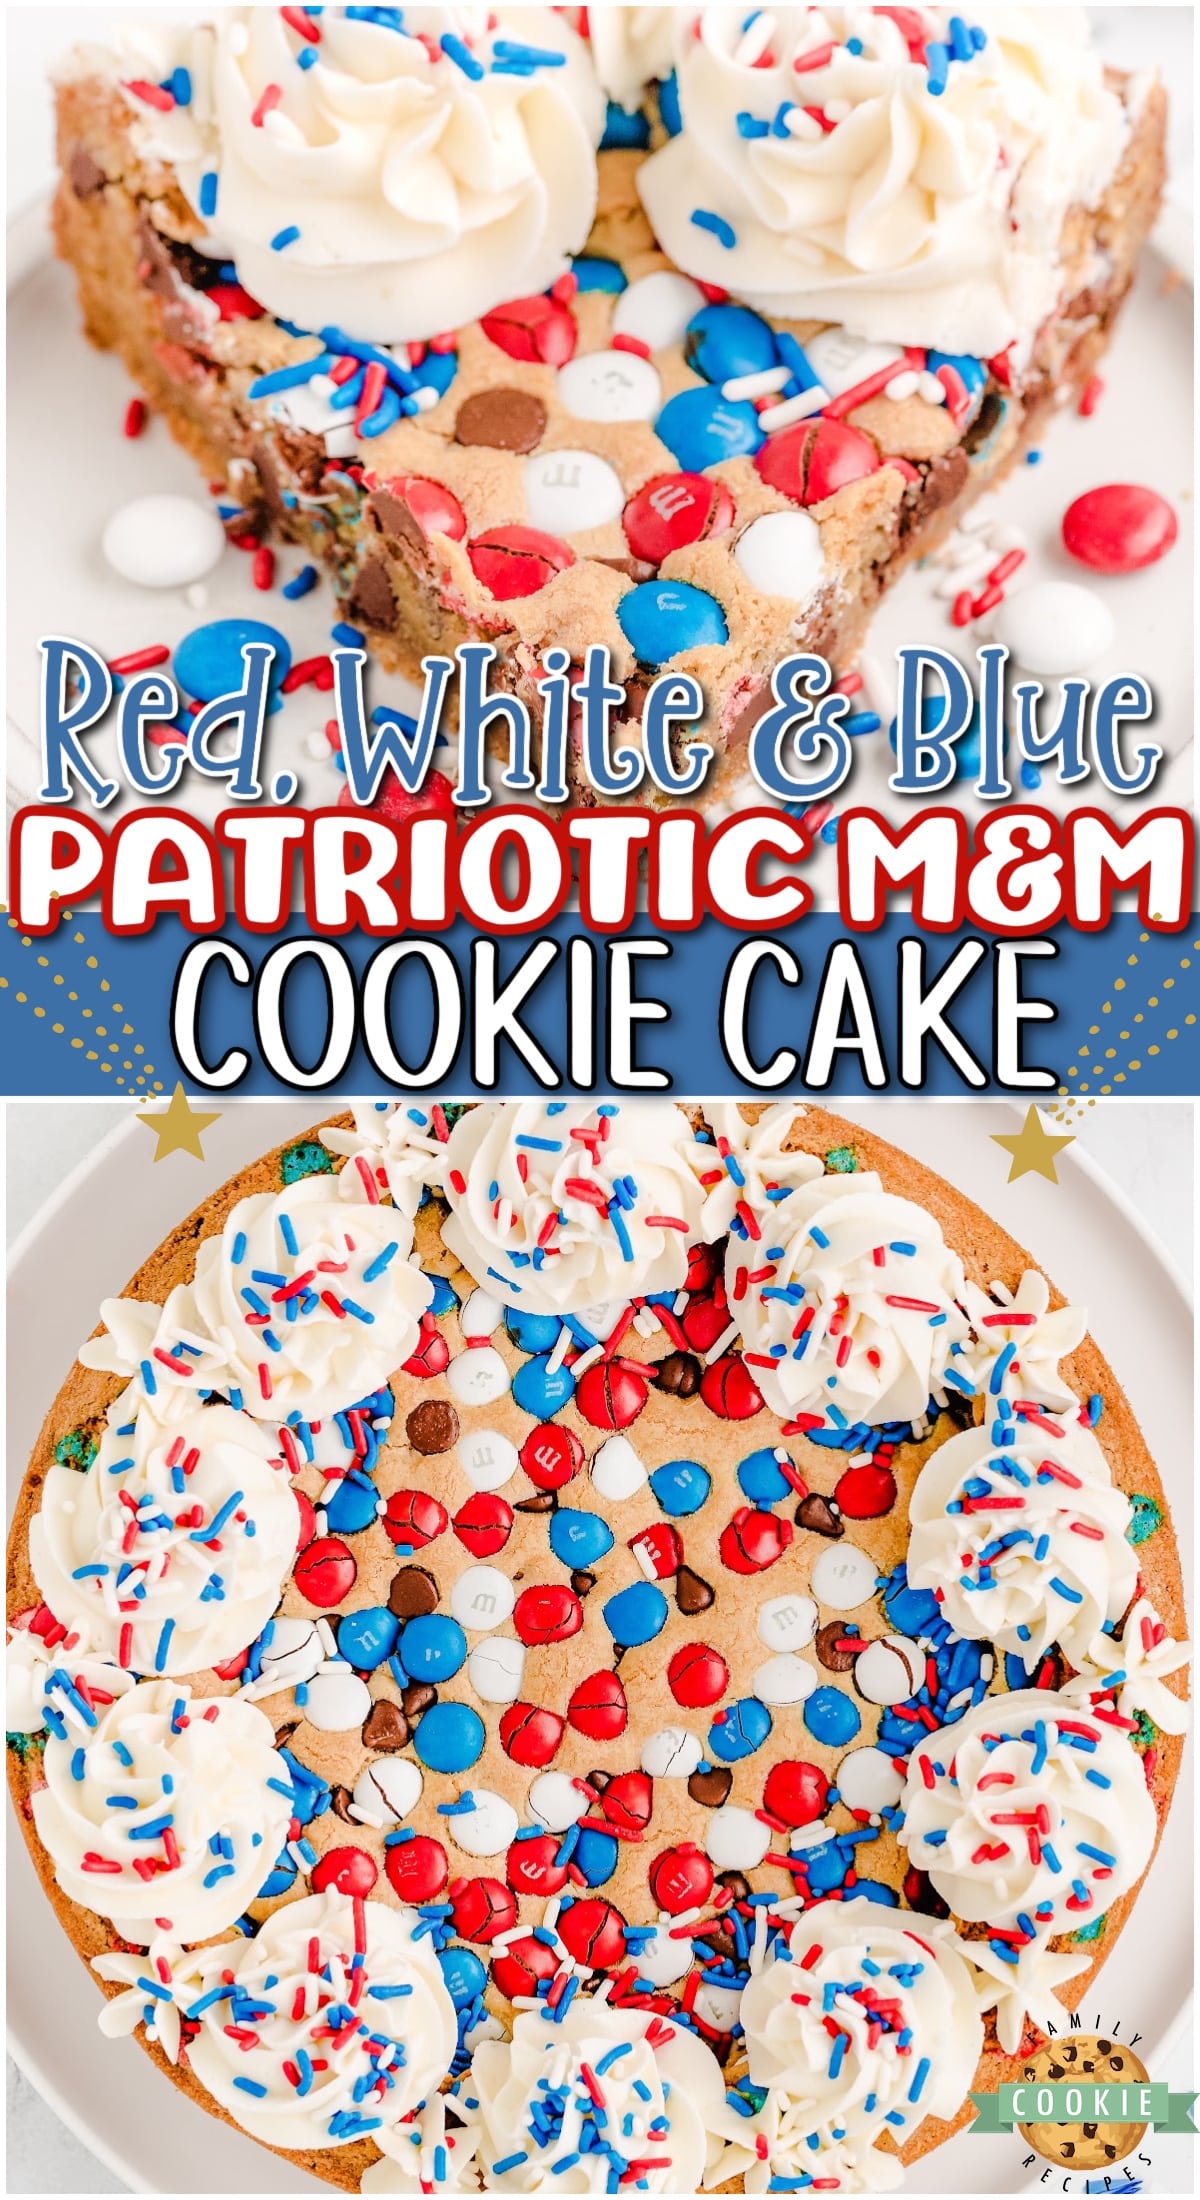 Fun, festive red, white & blue Patriotic Cookie Cake perfect for the 4th of July! Perfectly sweet, chewy M&M cookie dough baked & topped with buttercream frosting & sprinkles everyone loves! 